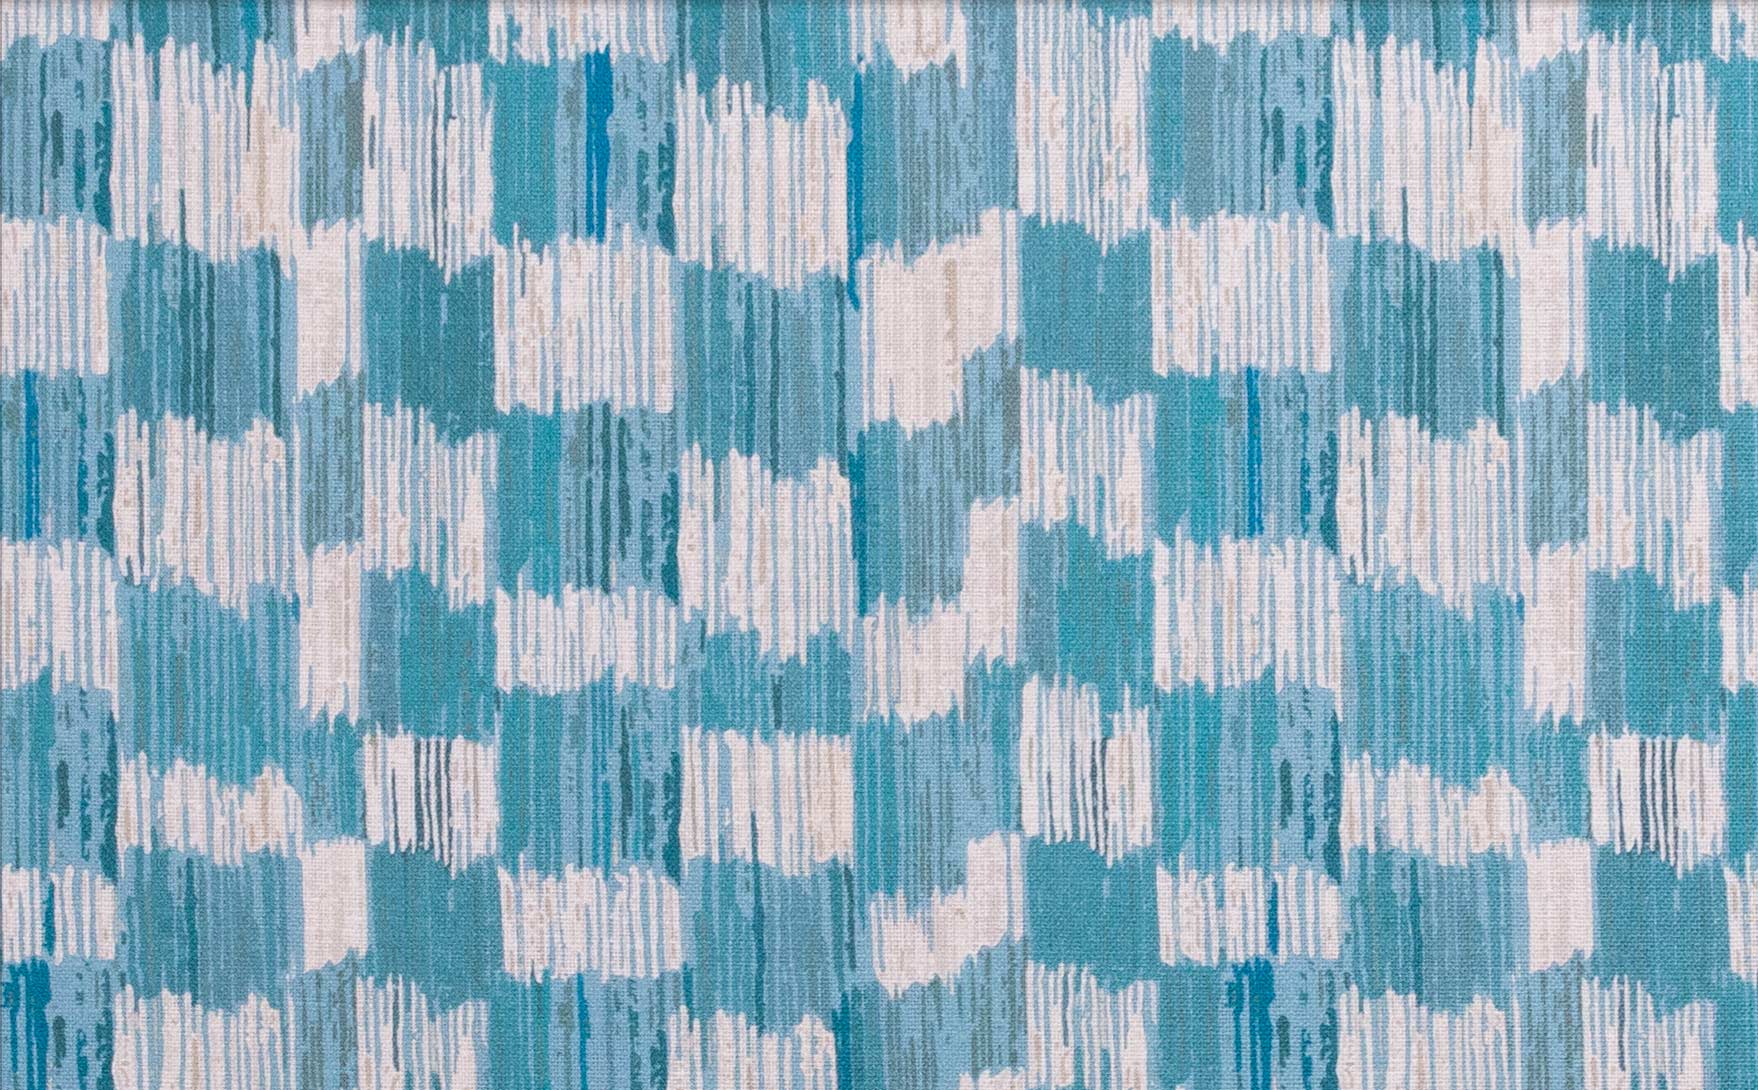 Detail of fabric in an abstract check print in shades of blue, turquoise and white.